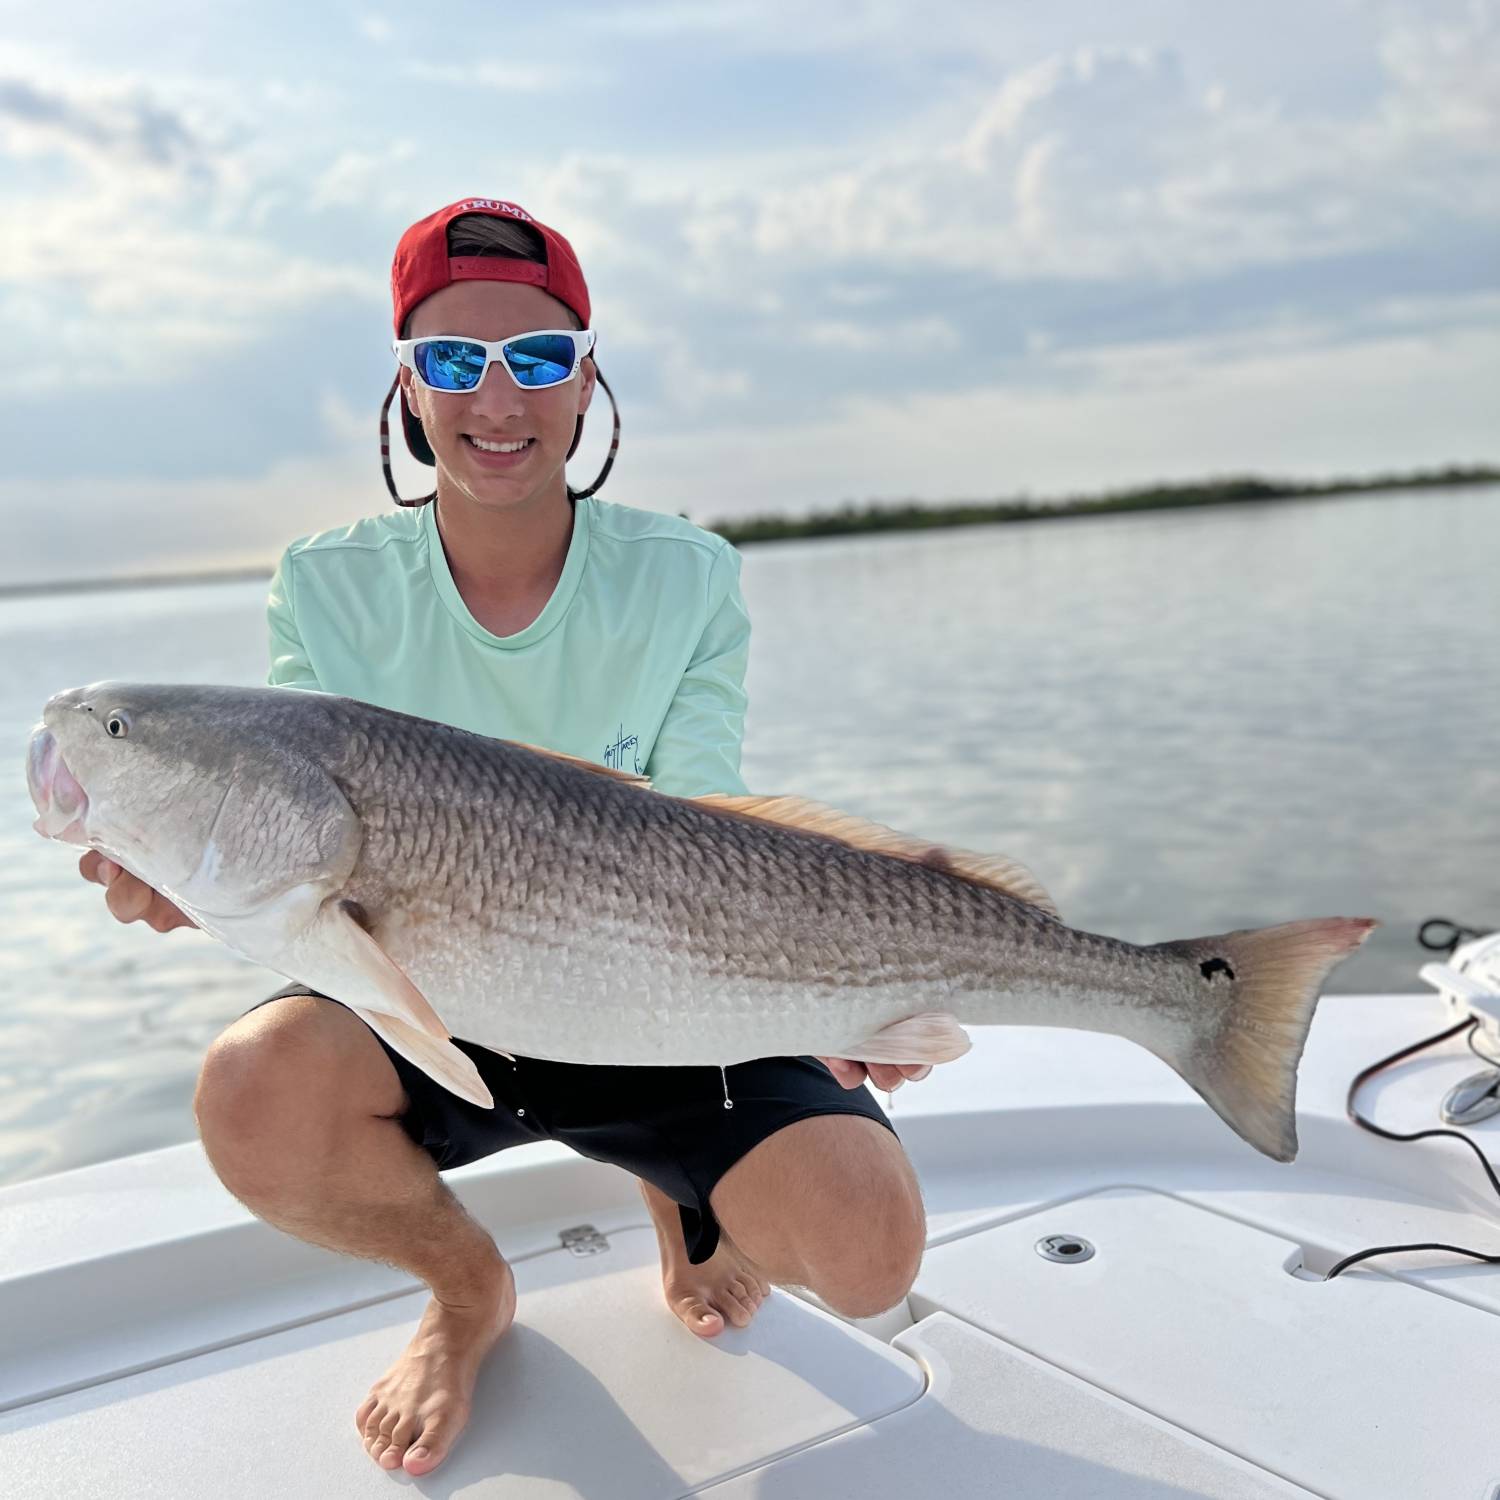 Our boy caught a monster red fish on our sportsman on his 18th bday!